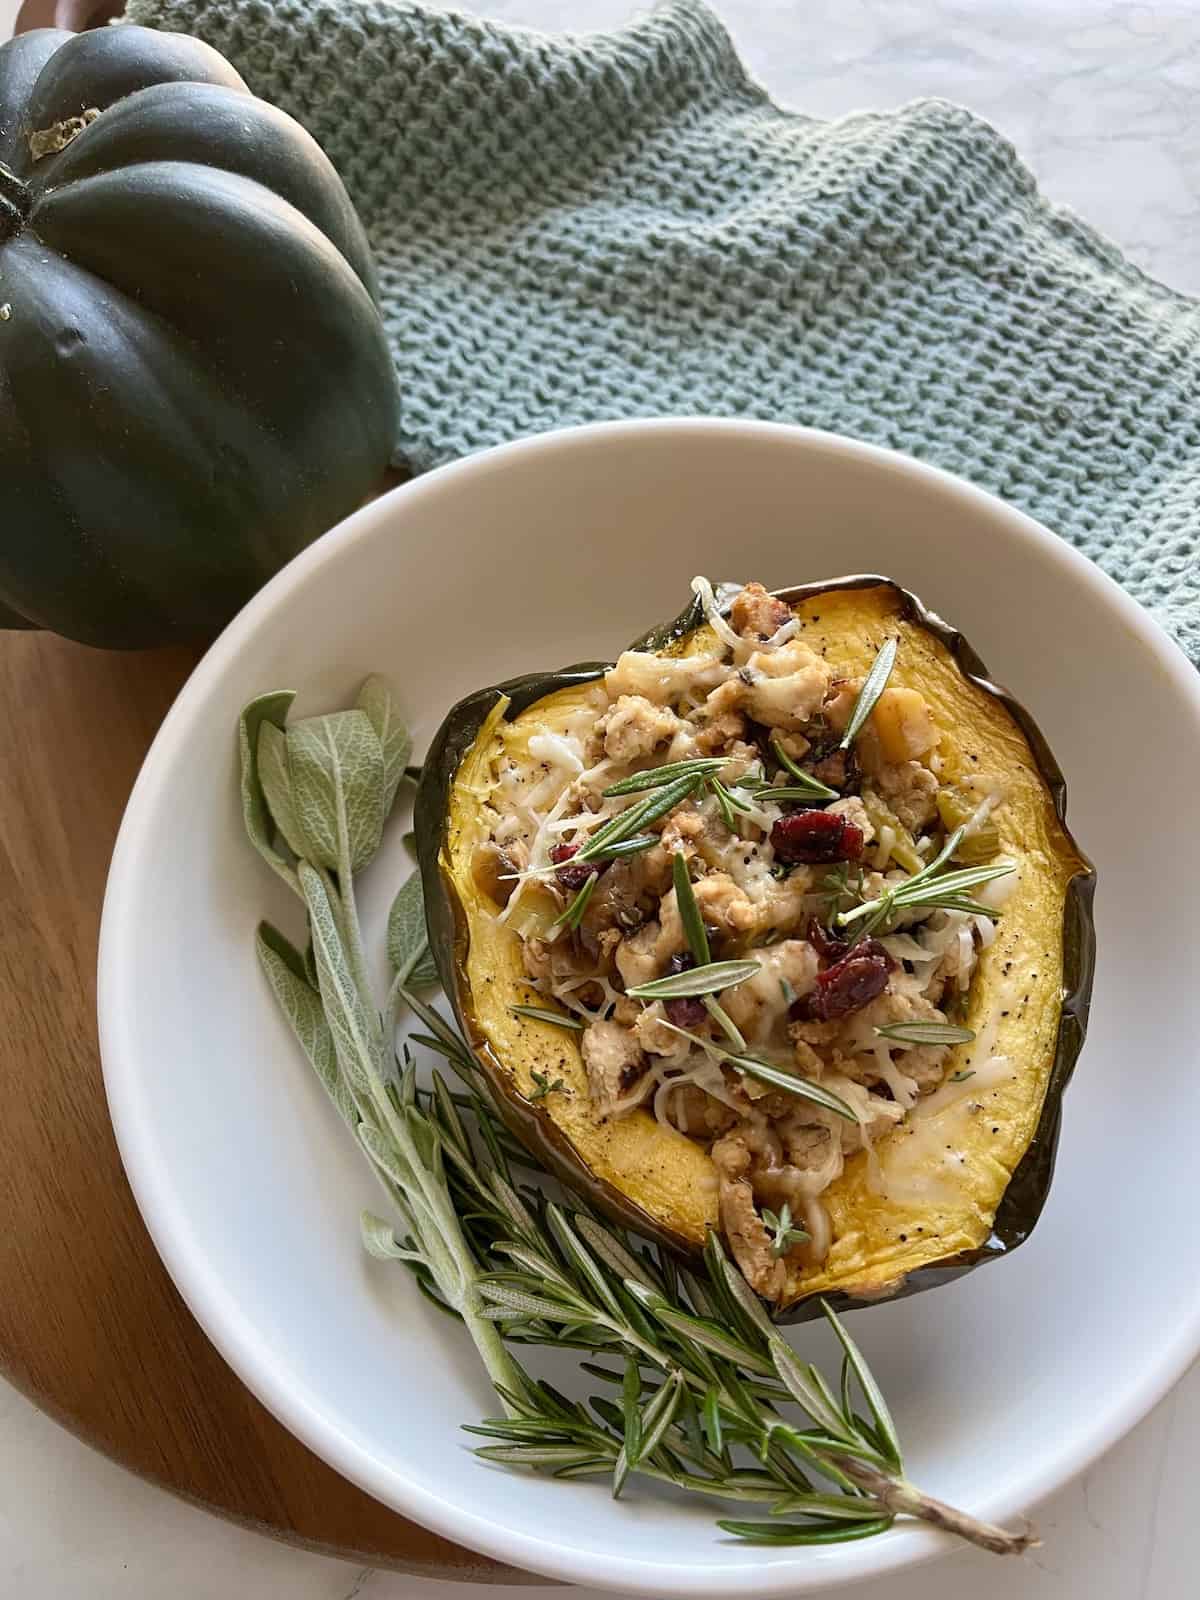 The finished product of Ground Turkey Stuffed Acorn Squash in a shallow white bowl with some fresh sage and a green dishcloth in the background